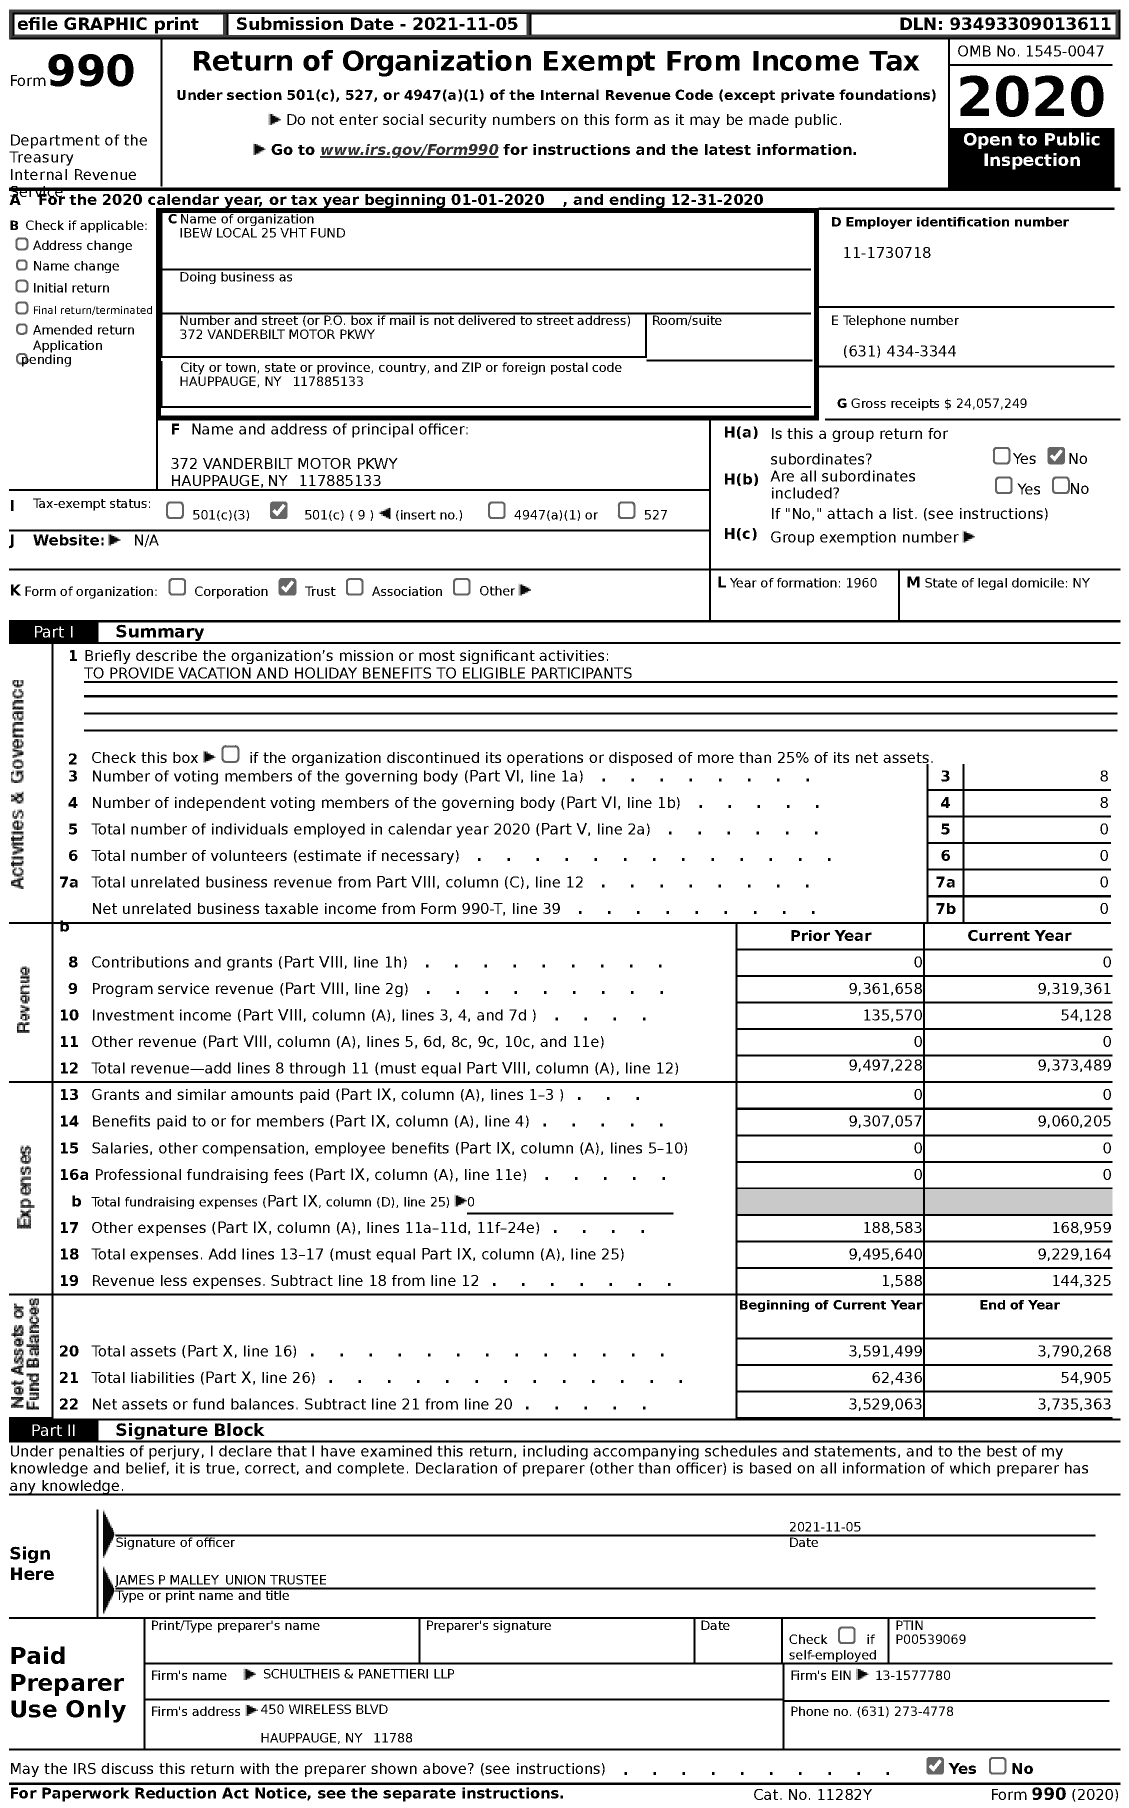 Image of first page of 2020 Form 990 for IBEW Local 25 VHT Fund